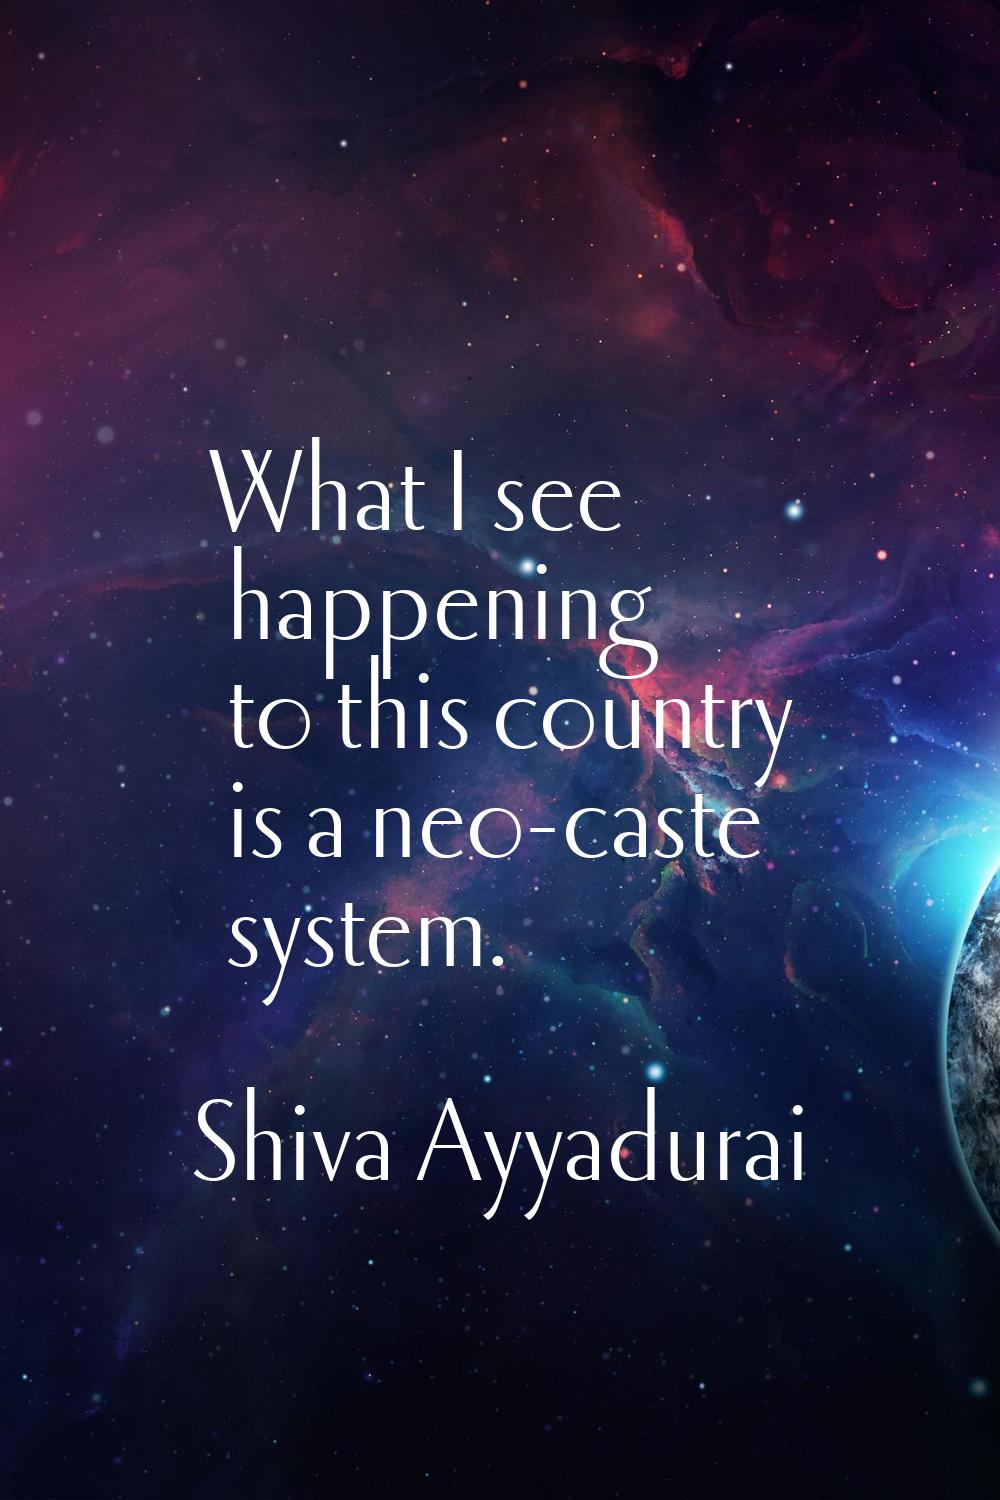 What I see happening to this country is a neo-caste system.